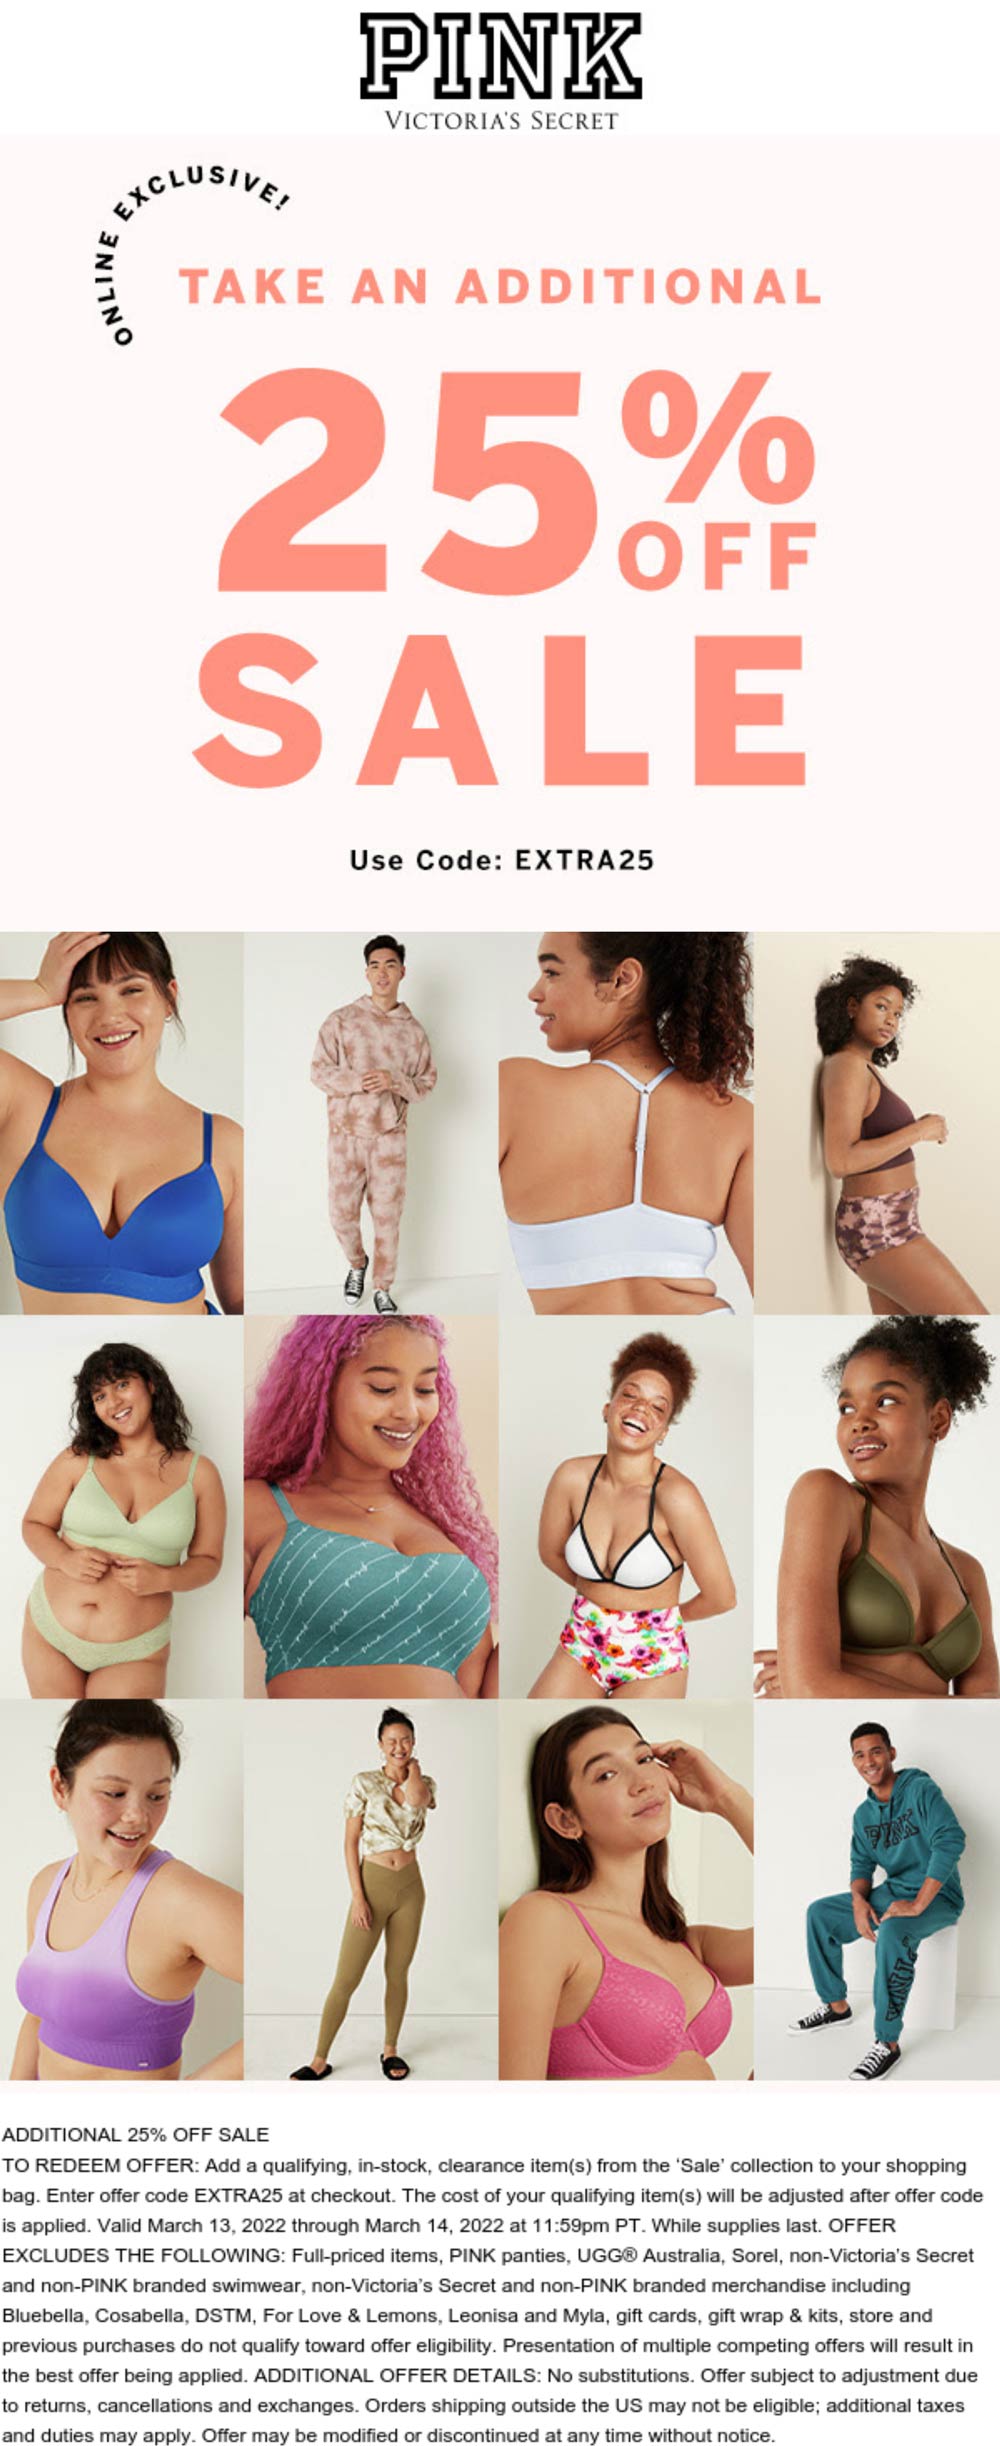 PINK stores Coupon  Extra 25% off sale items today at PINK via promo code EXTRA25 #pink 